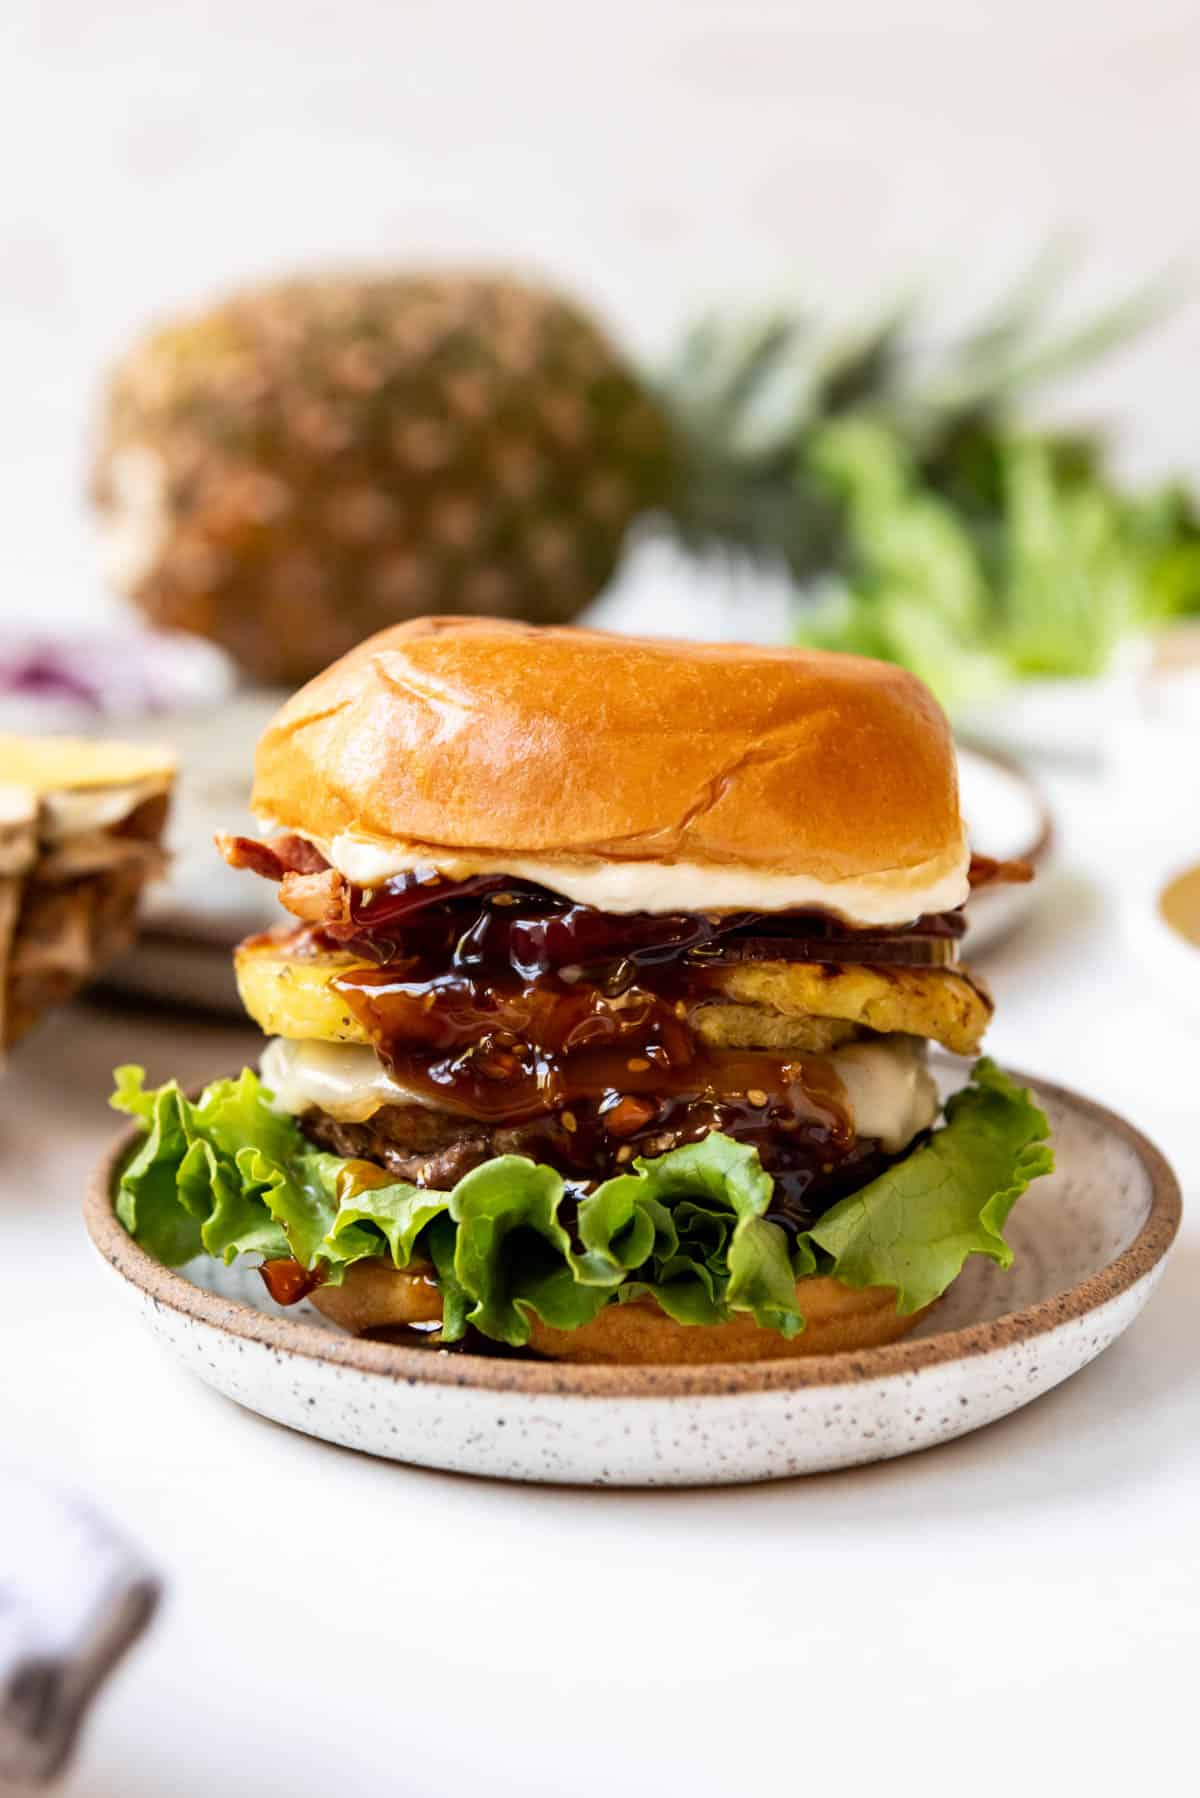 An image of a Hawaiian burger with grilled pineapple and teriyaki sauce in front of a whole pineapple.